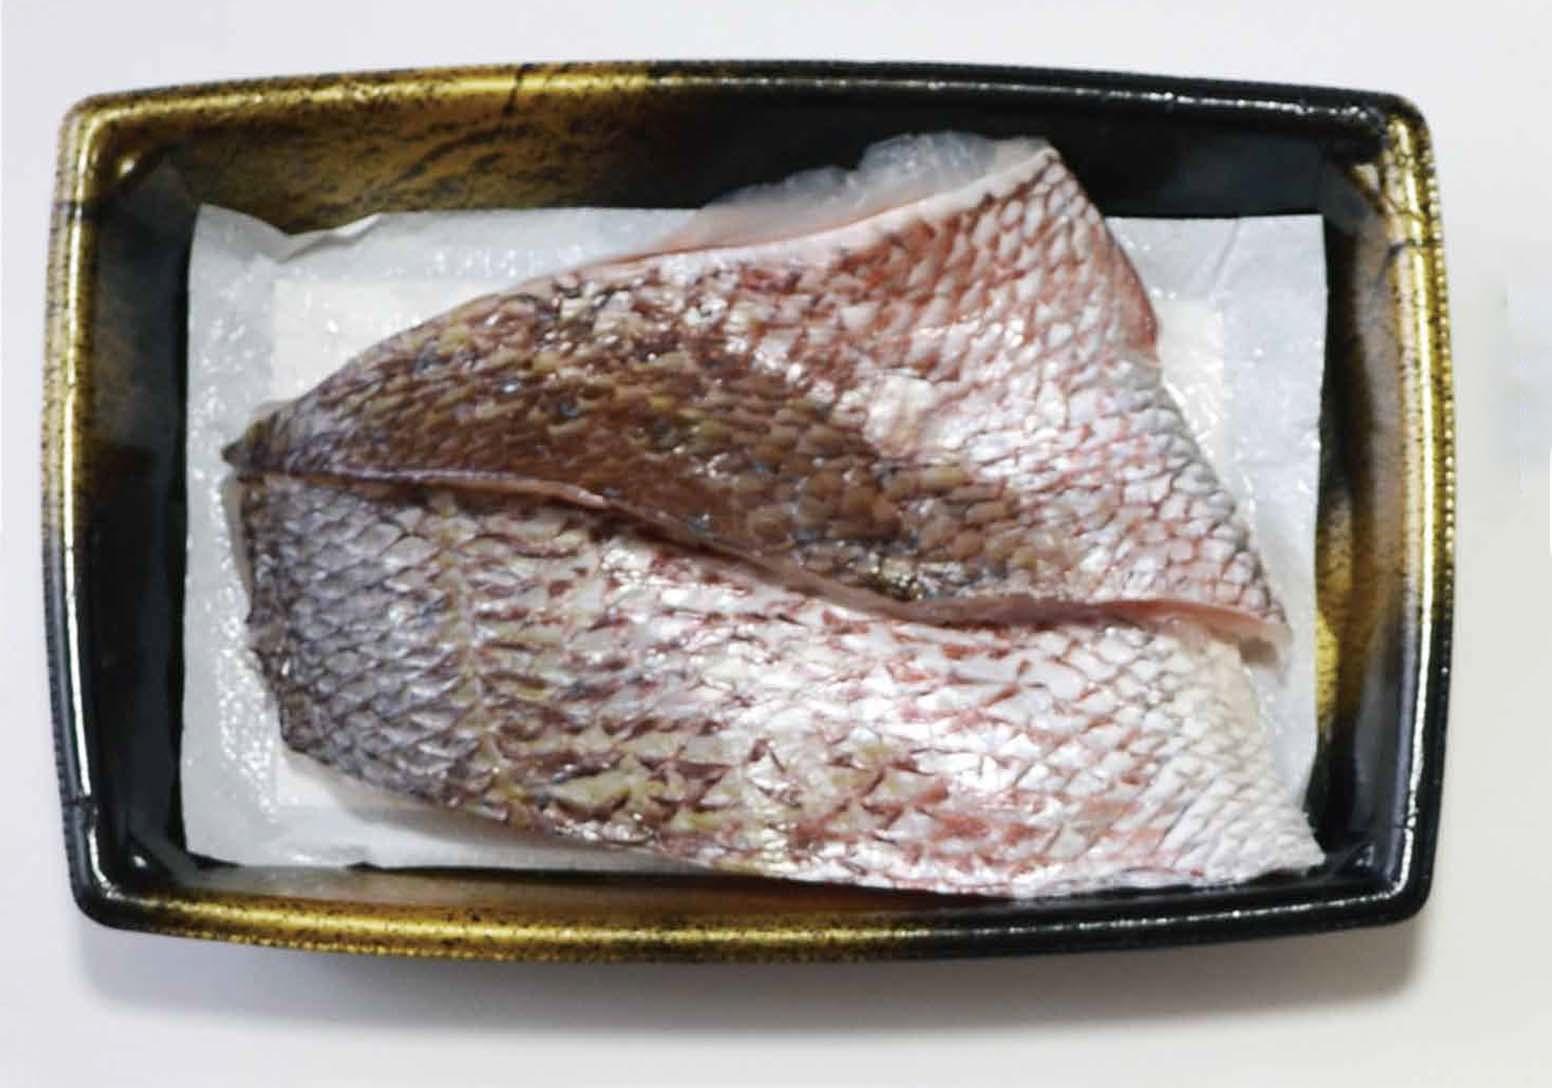 leak-free absorbent food pad design to absorb excess moisture for cut fish fillets-3